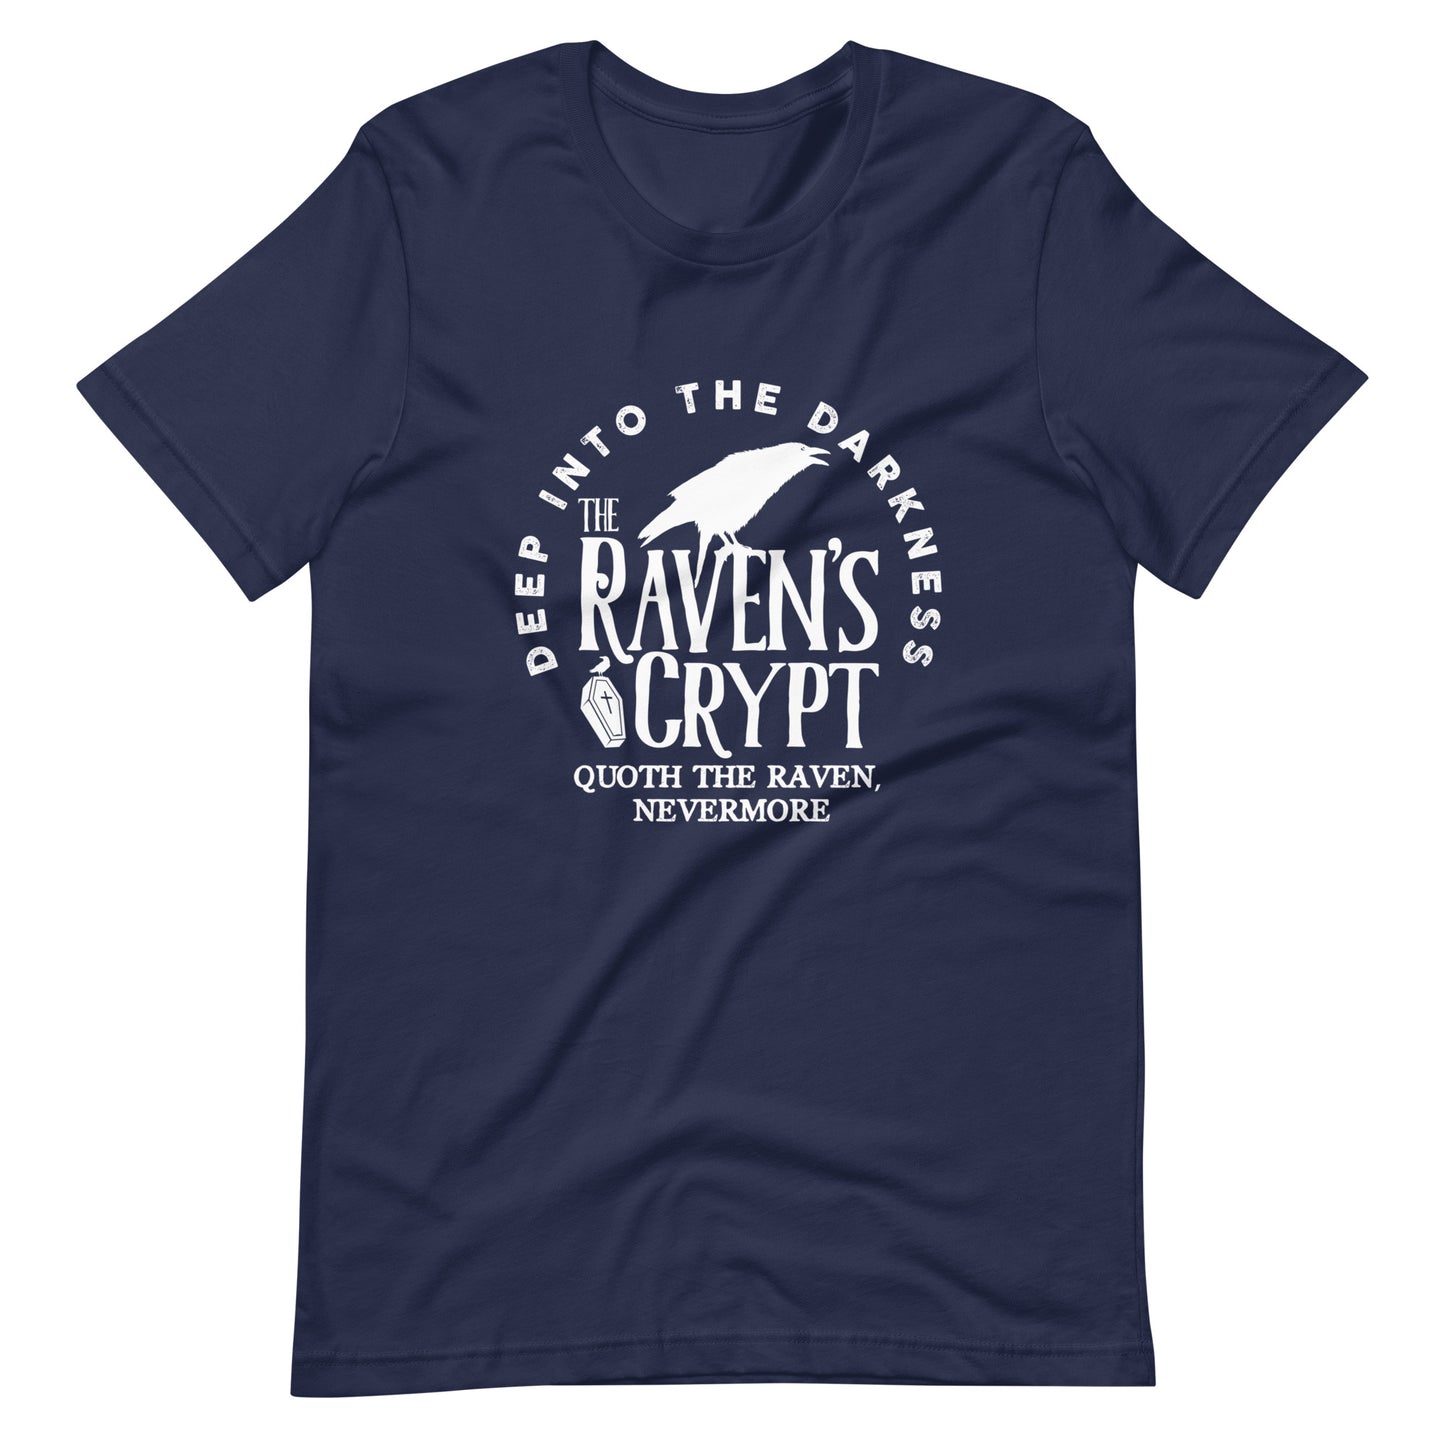 Deep Into the Darkness The Raven's Crypt - Men's t-shirt - Navy Front